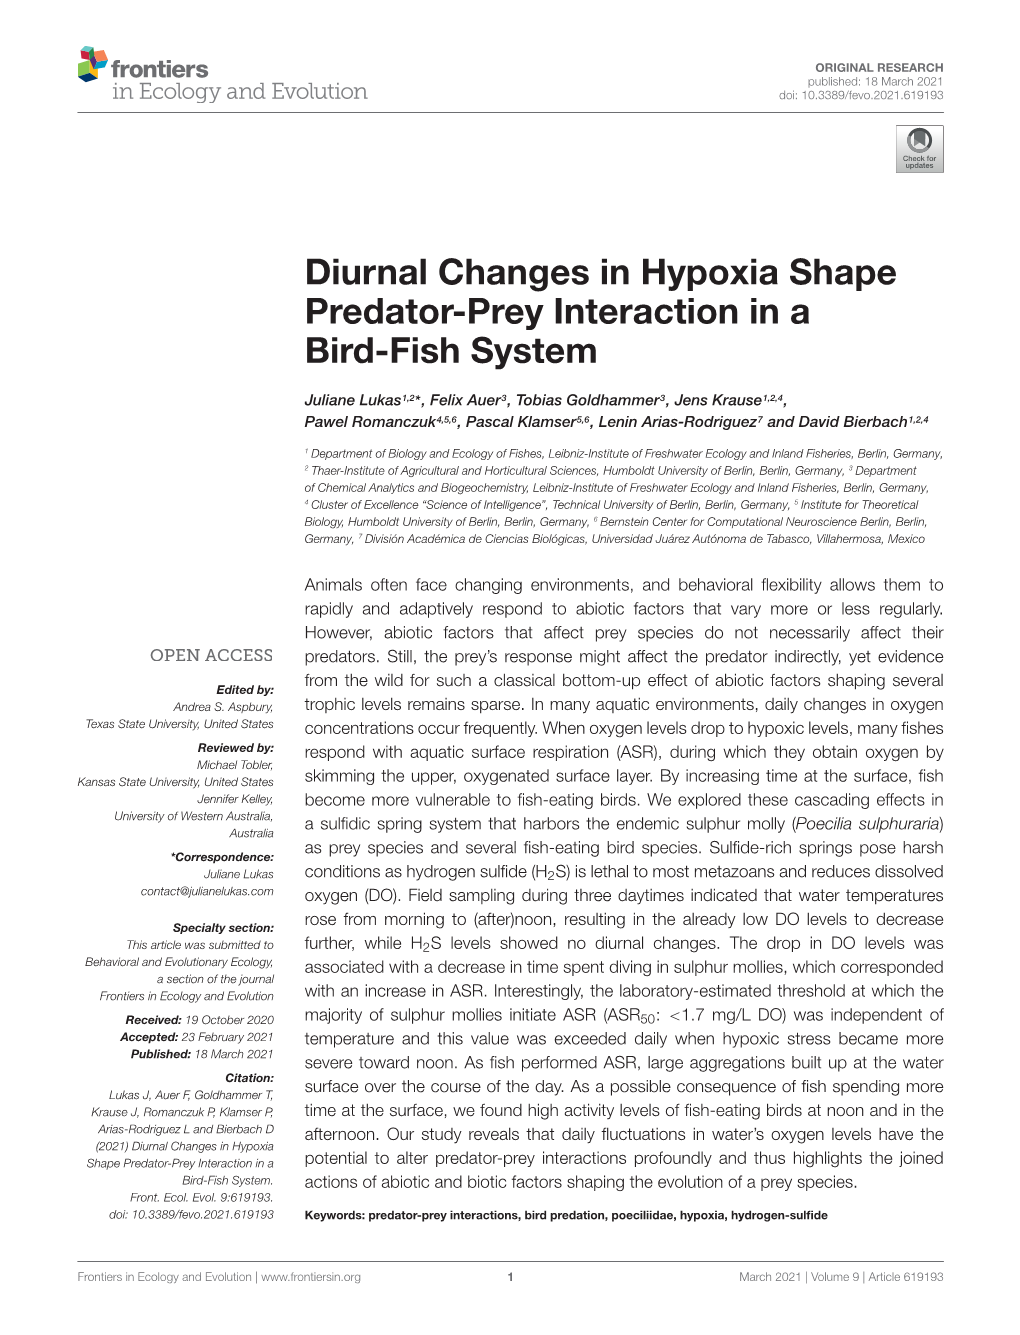 Diurnal Changes in Hypoxia Shape Predator-Prey Interaction in a Bird-Fish System